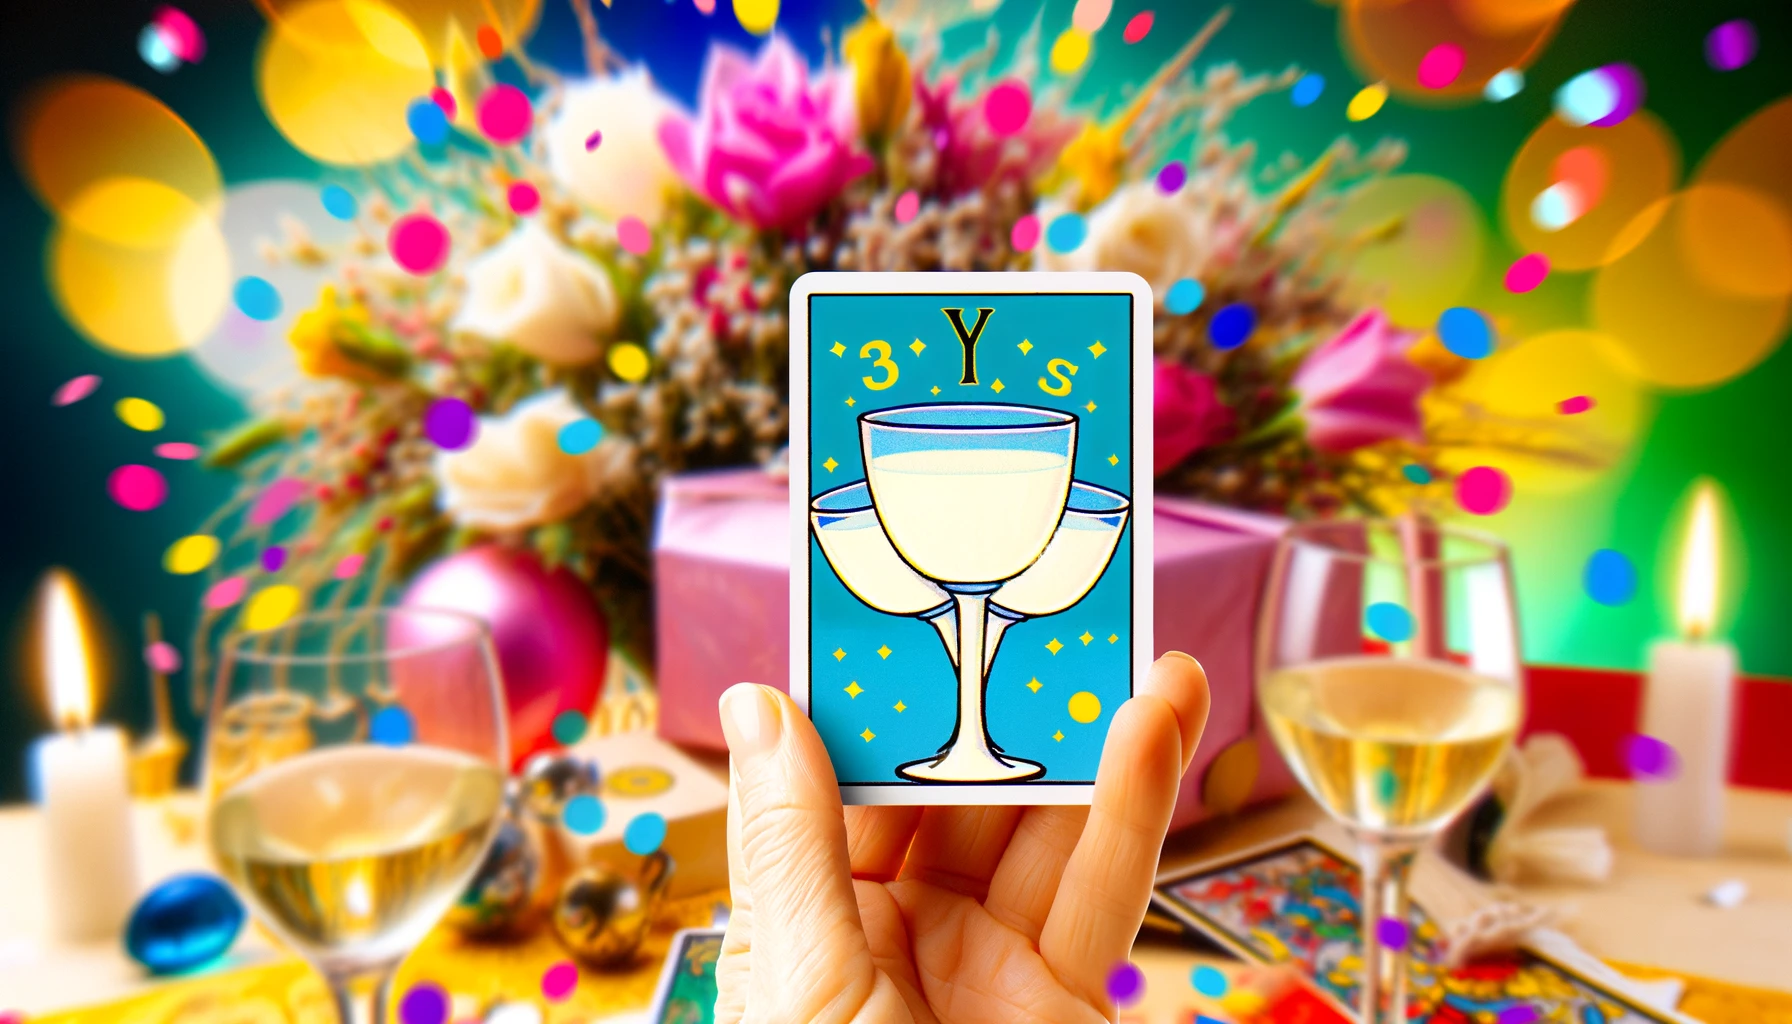 "An illustration of three cups raised in a toast against a vibrant, festive background, symbolizing positive outcomes, celebrations, and community support. The scene evokes feelings of affirmation, joy, and camaraderie, reflecting the essence of the Three of Cups card in decision-making contexts. It represents a sign of communal joy and the affirmation of success in a Yes or No Tarot reading."